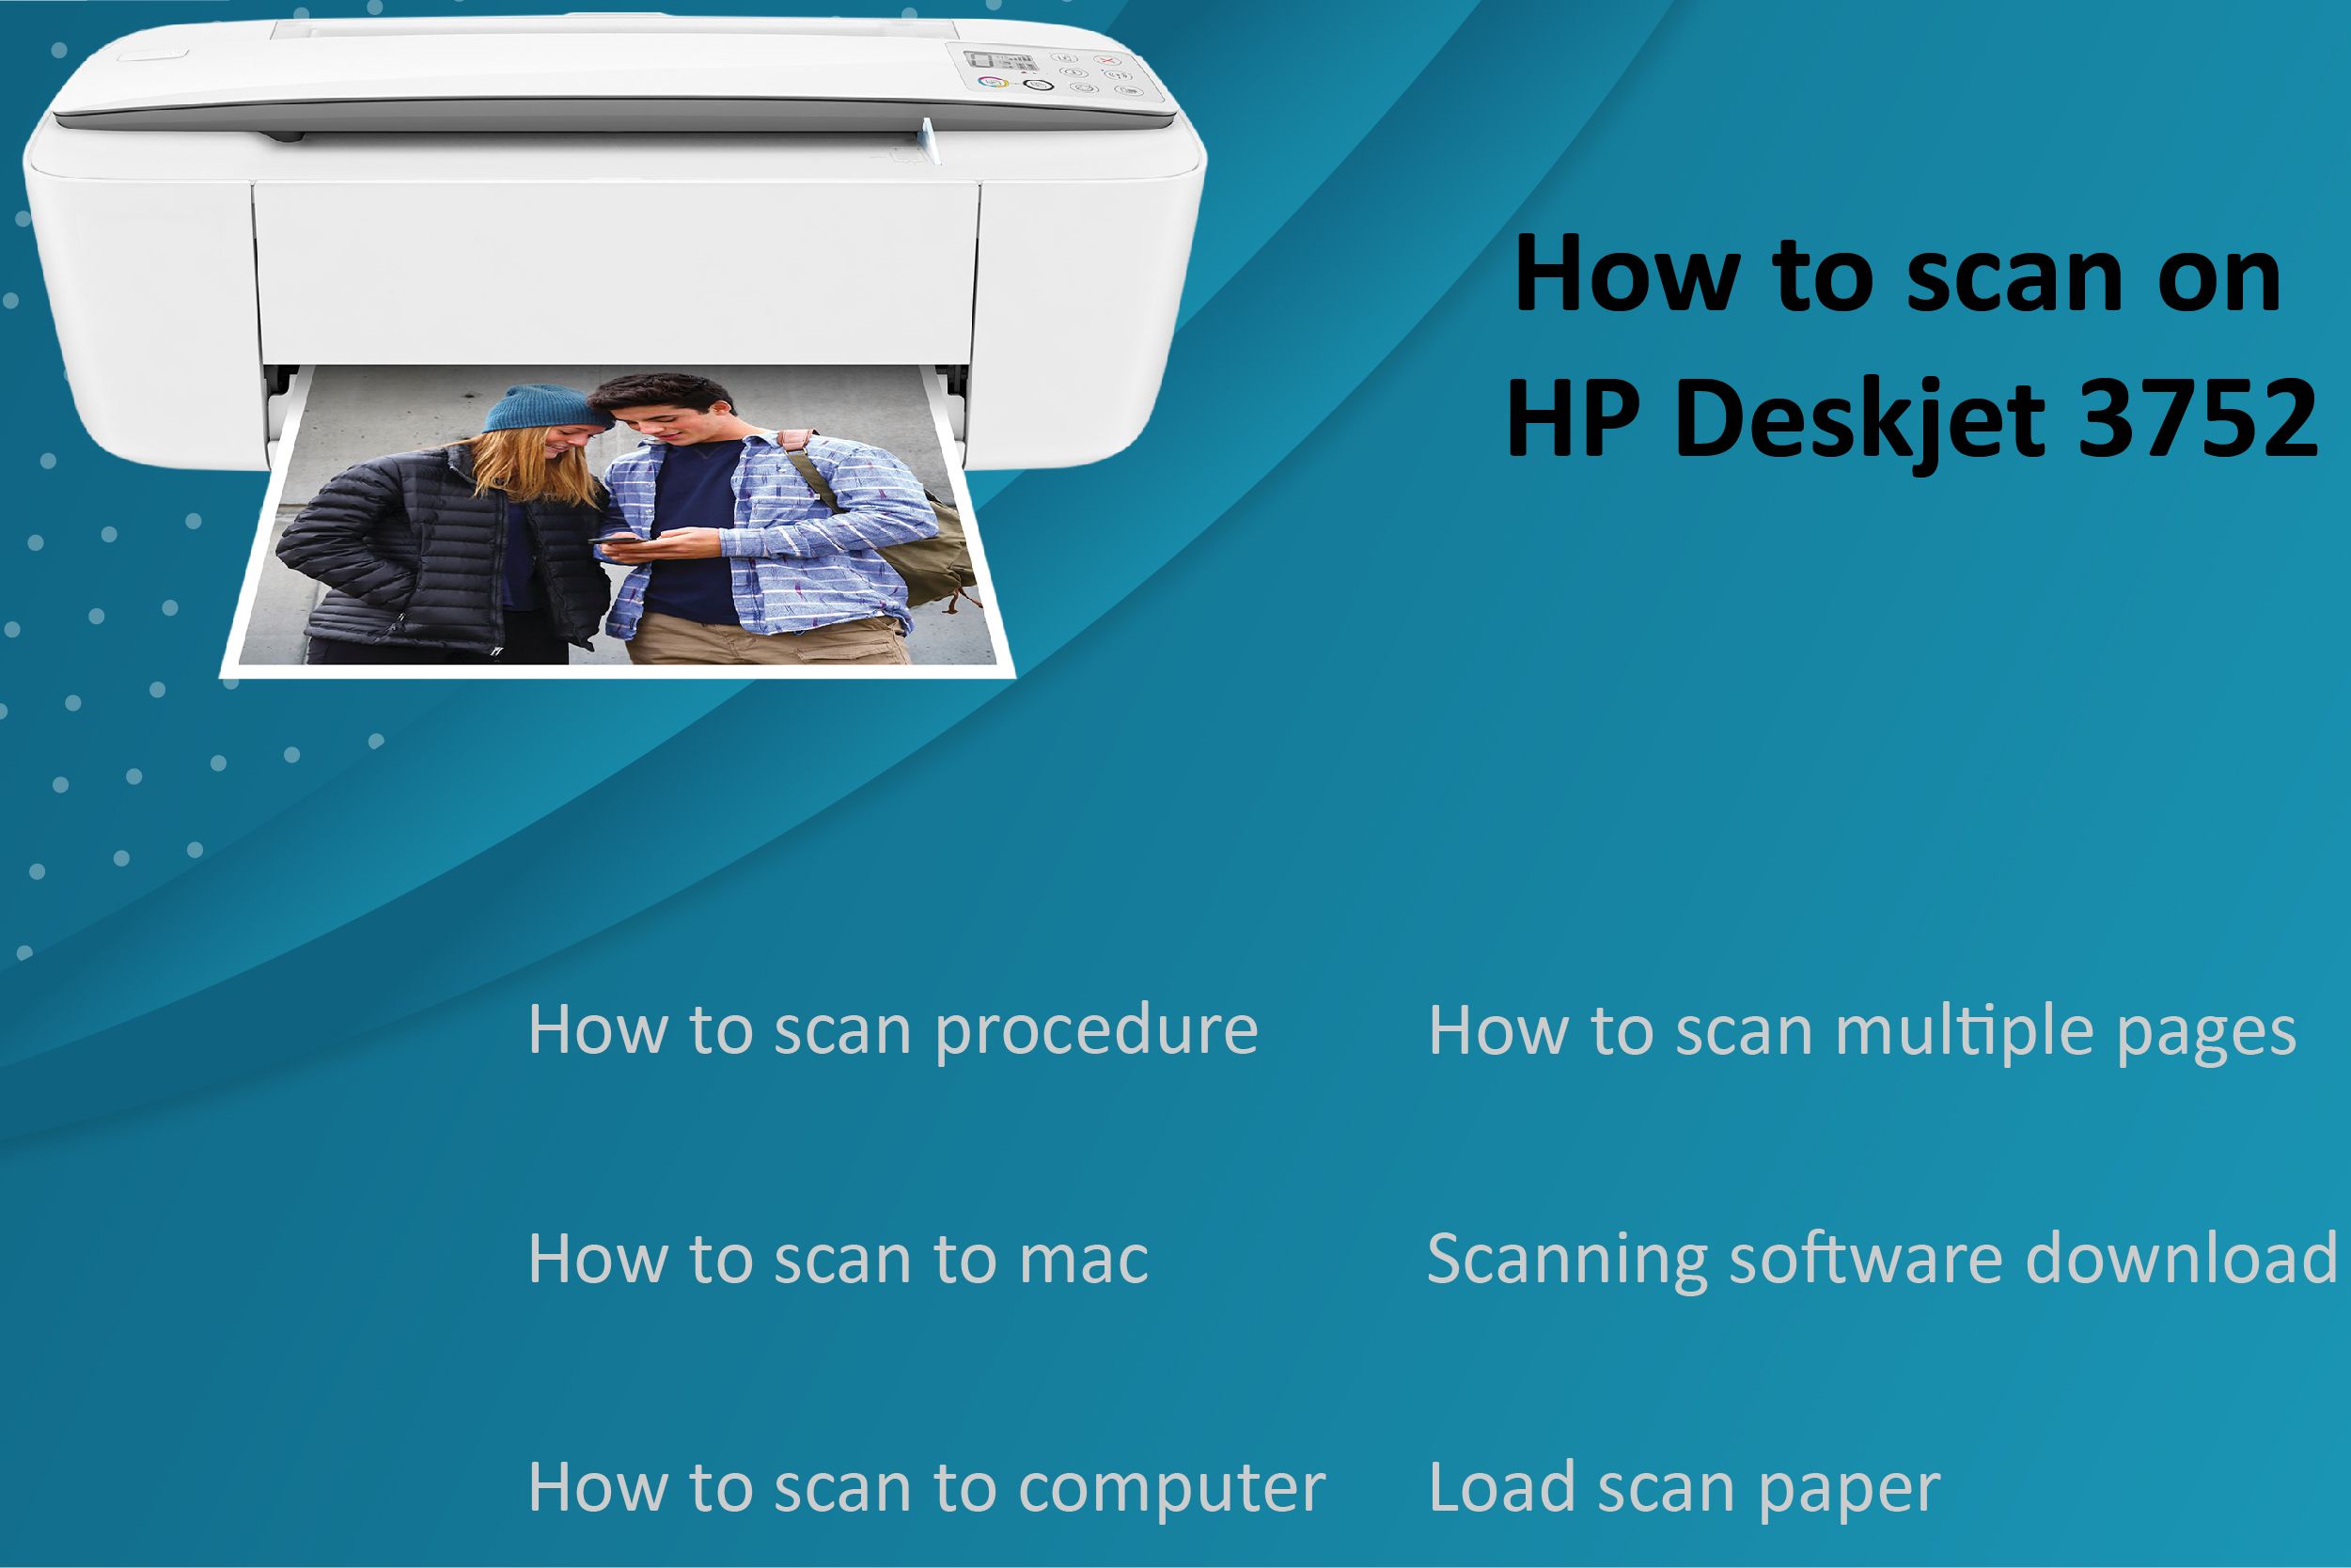 driver hp officejet pro 8710 for mac